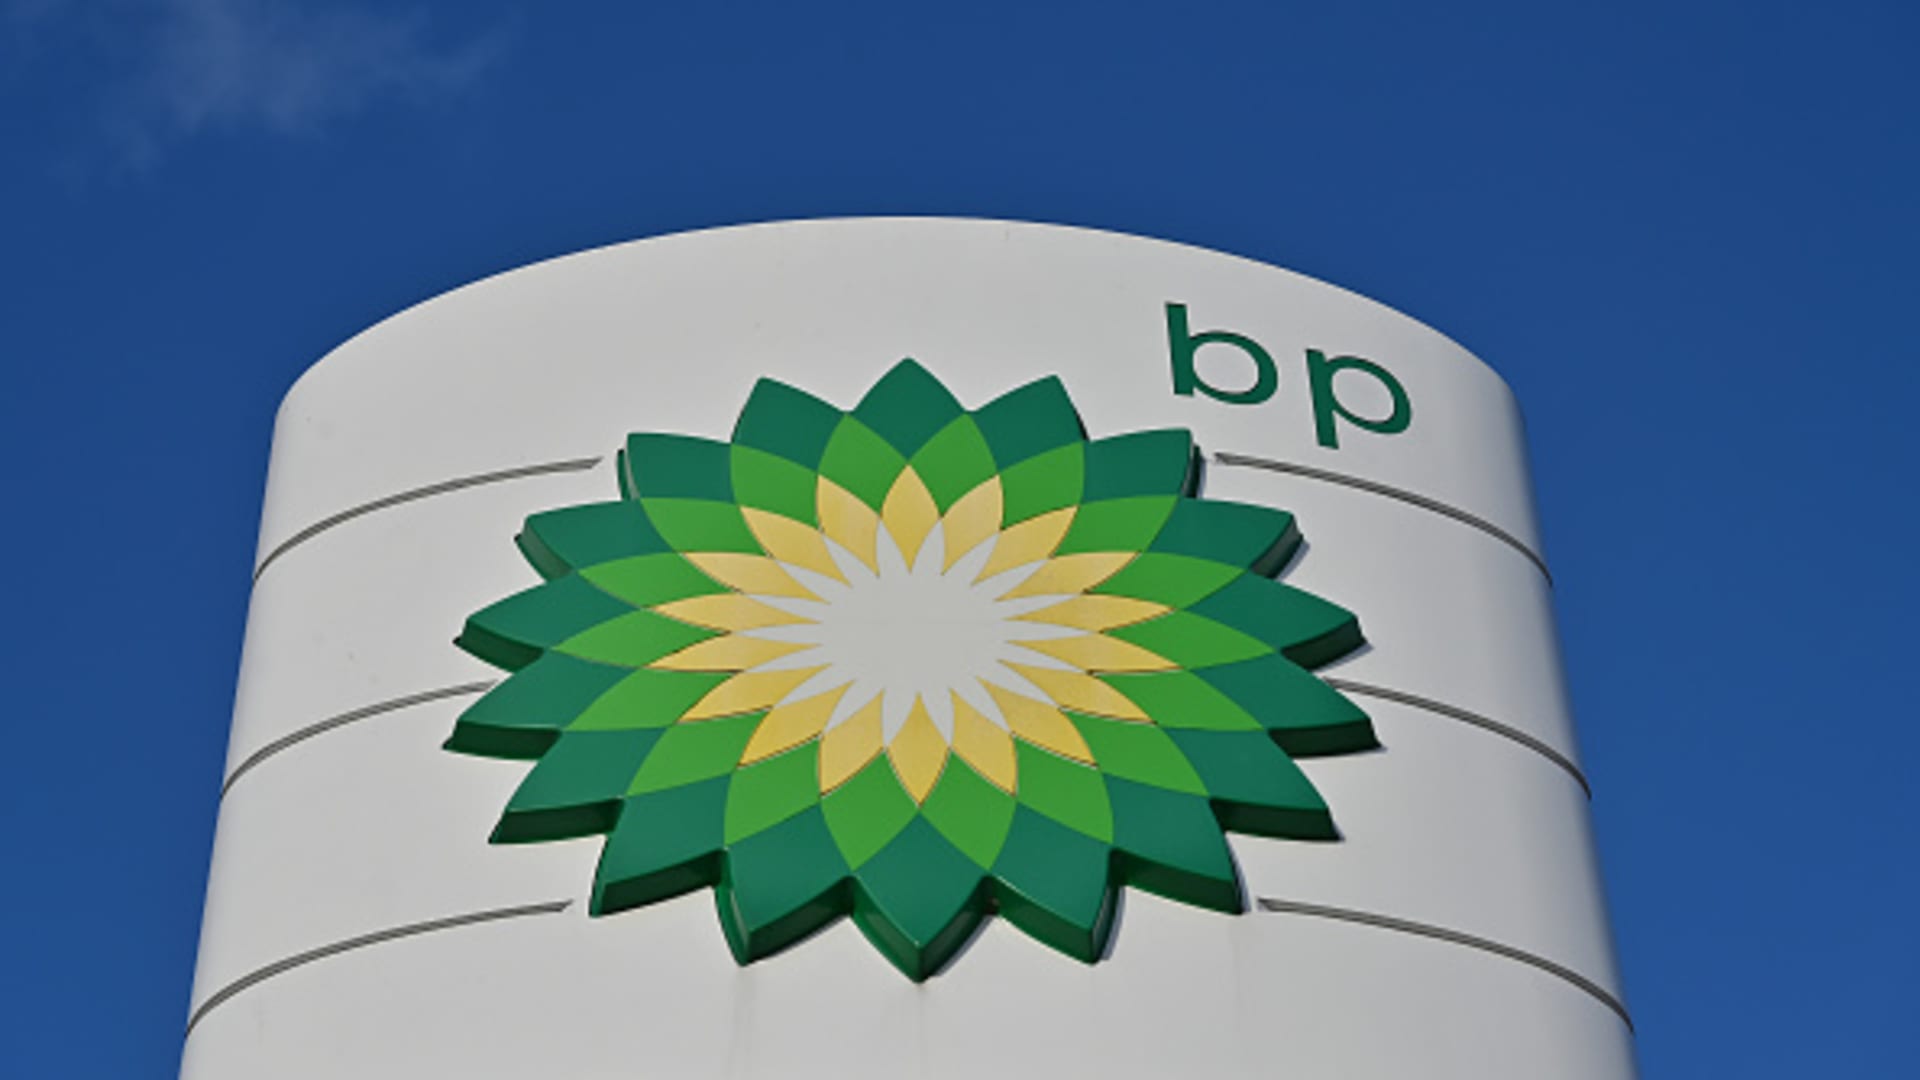 BP exec’s husband guilty of making .8 million from insider trading, snooped on her calls